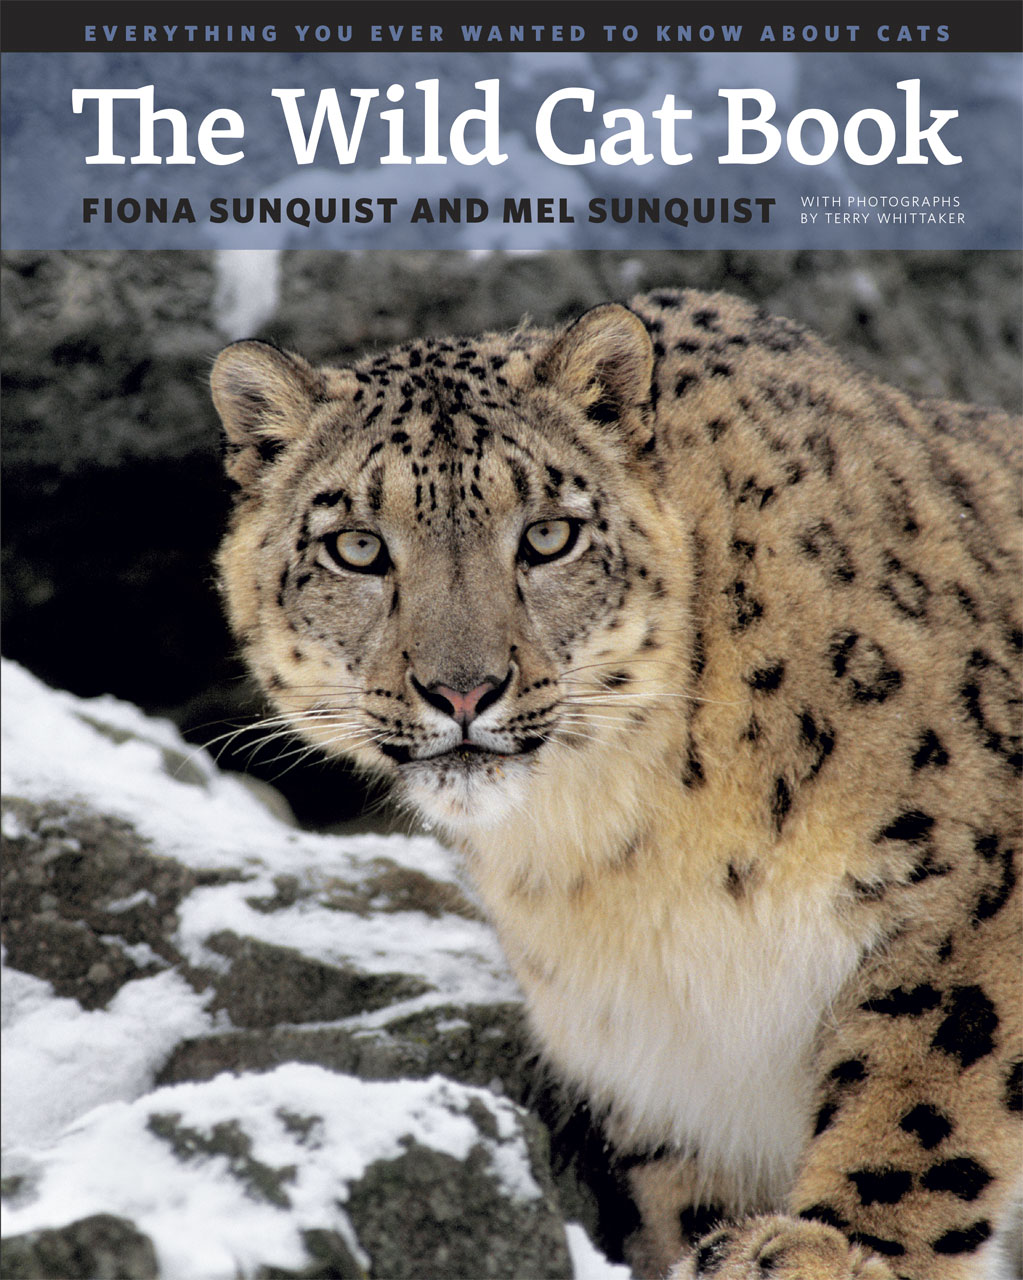 The Wild Cat Book Everything You Ever Wanted To Know About Cats